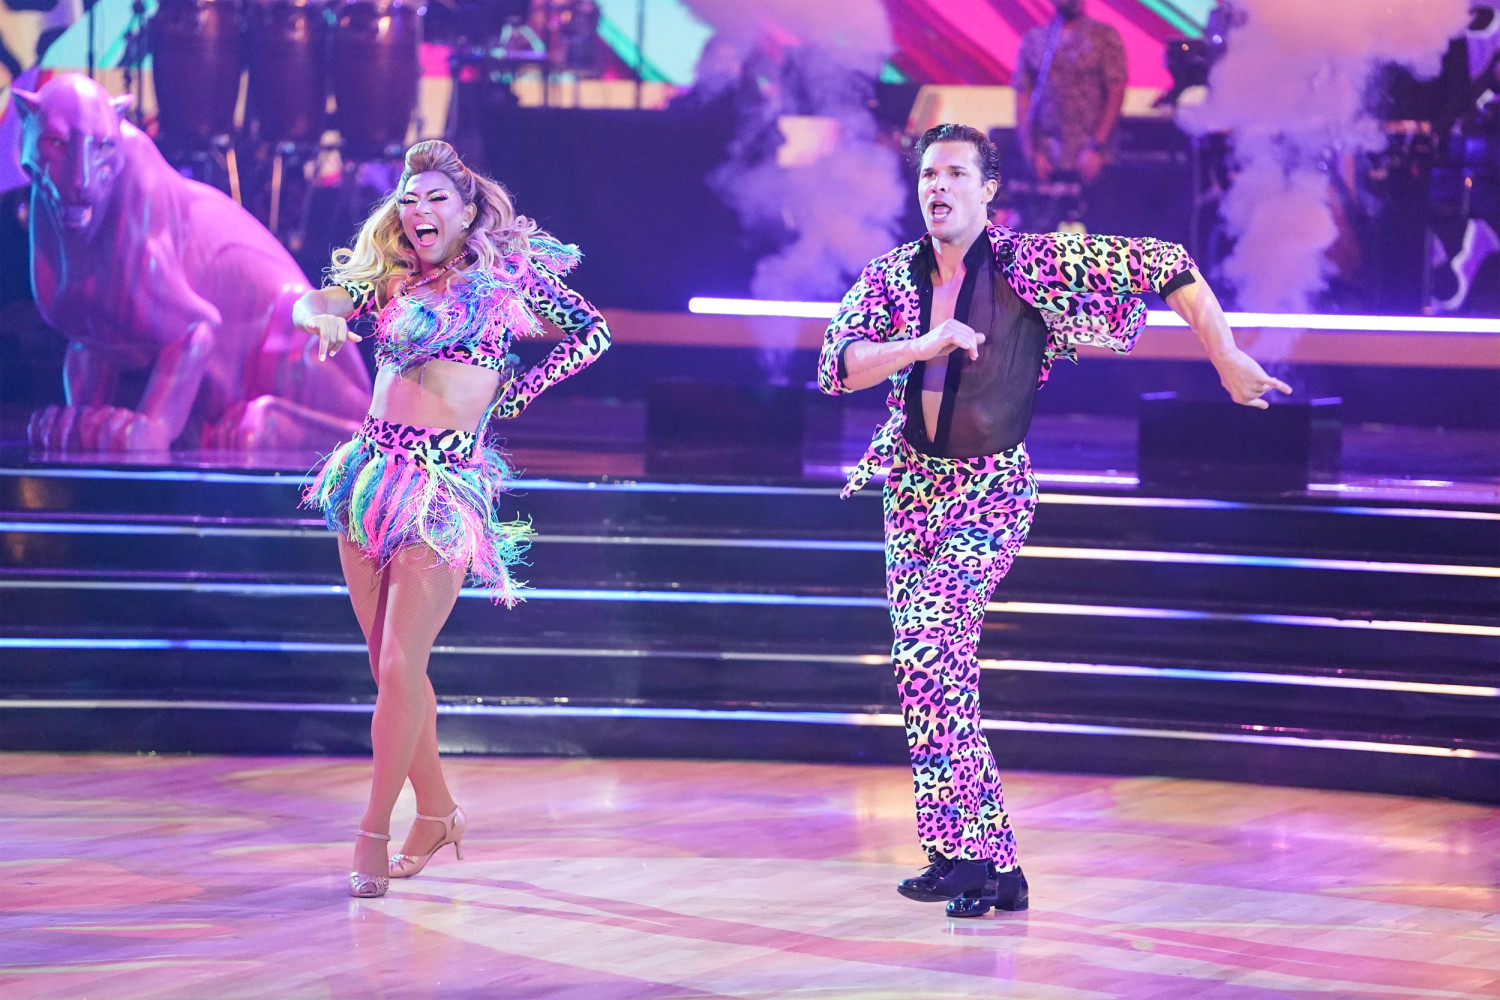 Drag performer Shangela makes ‘Dancing With the Stars’ history